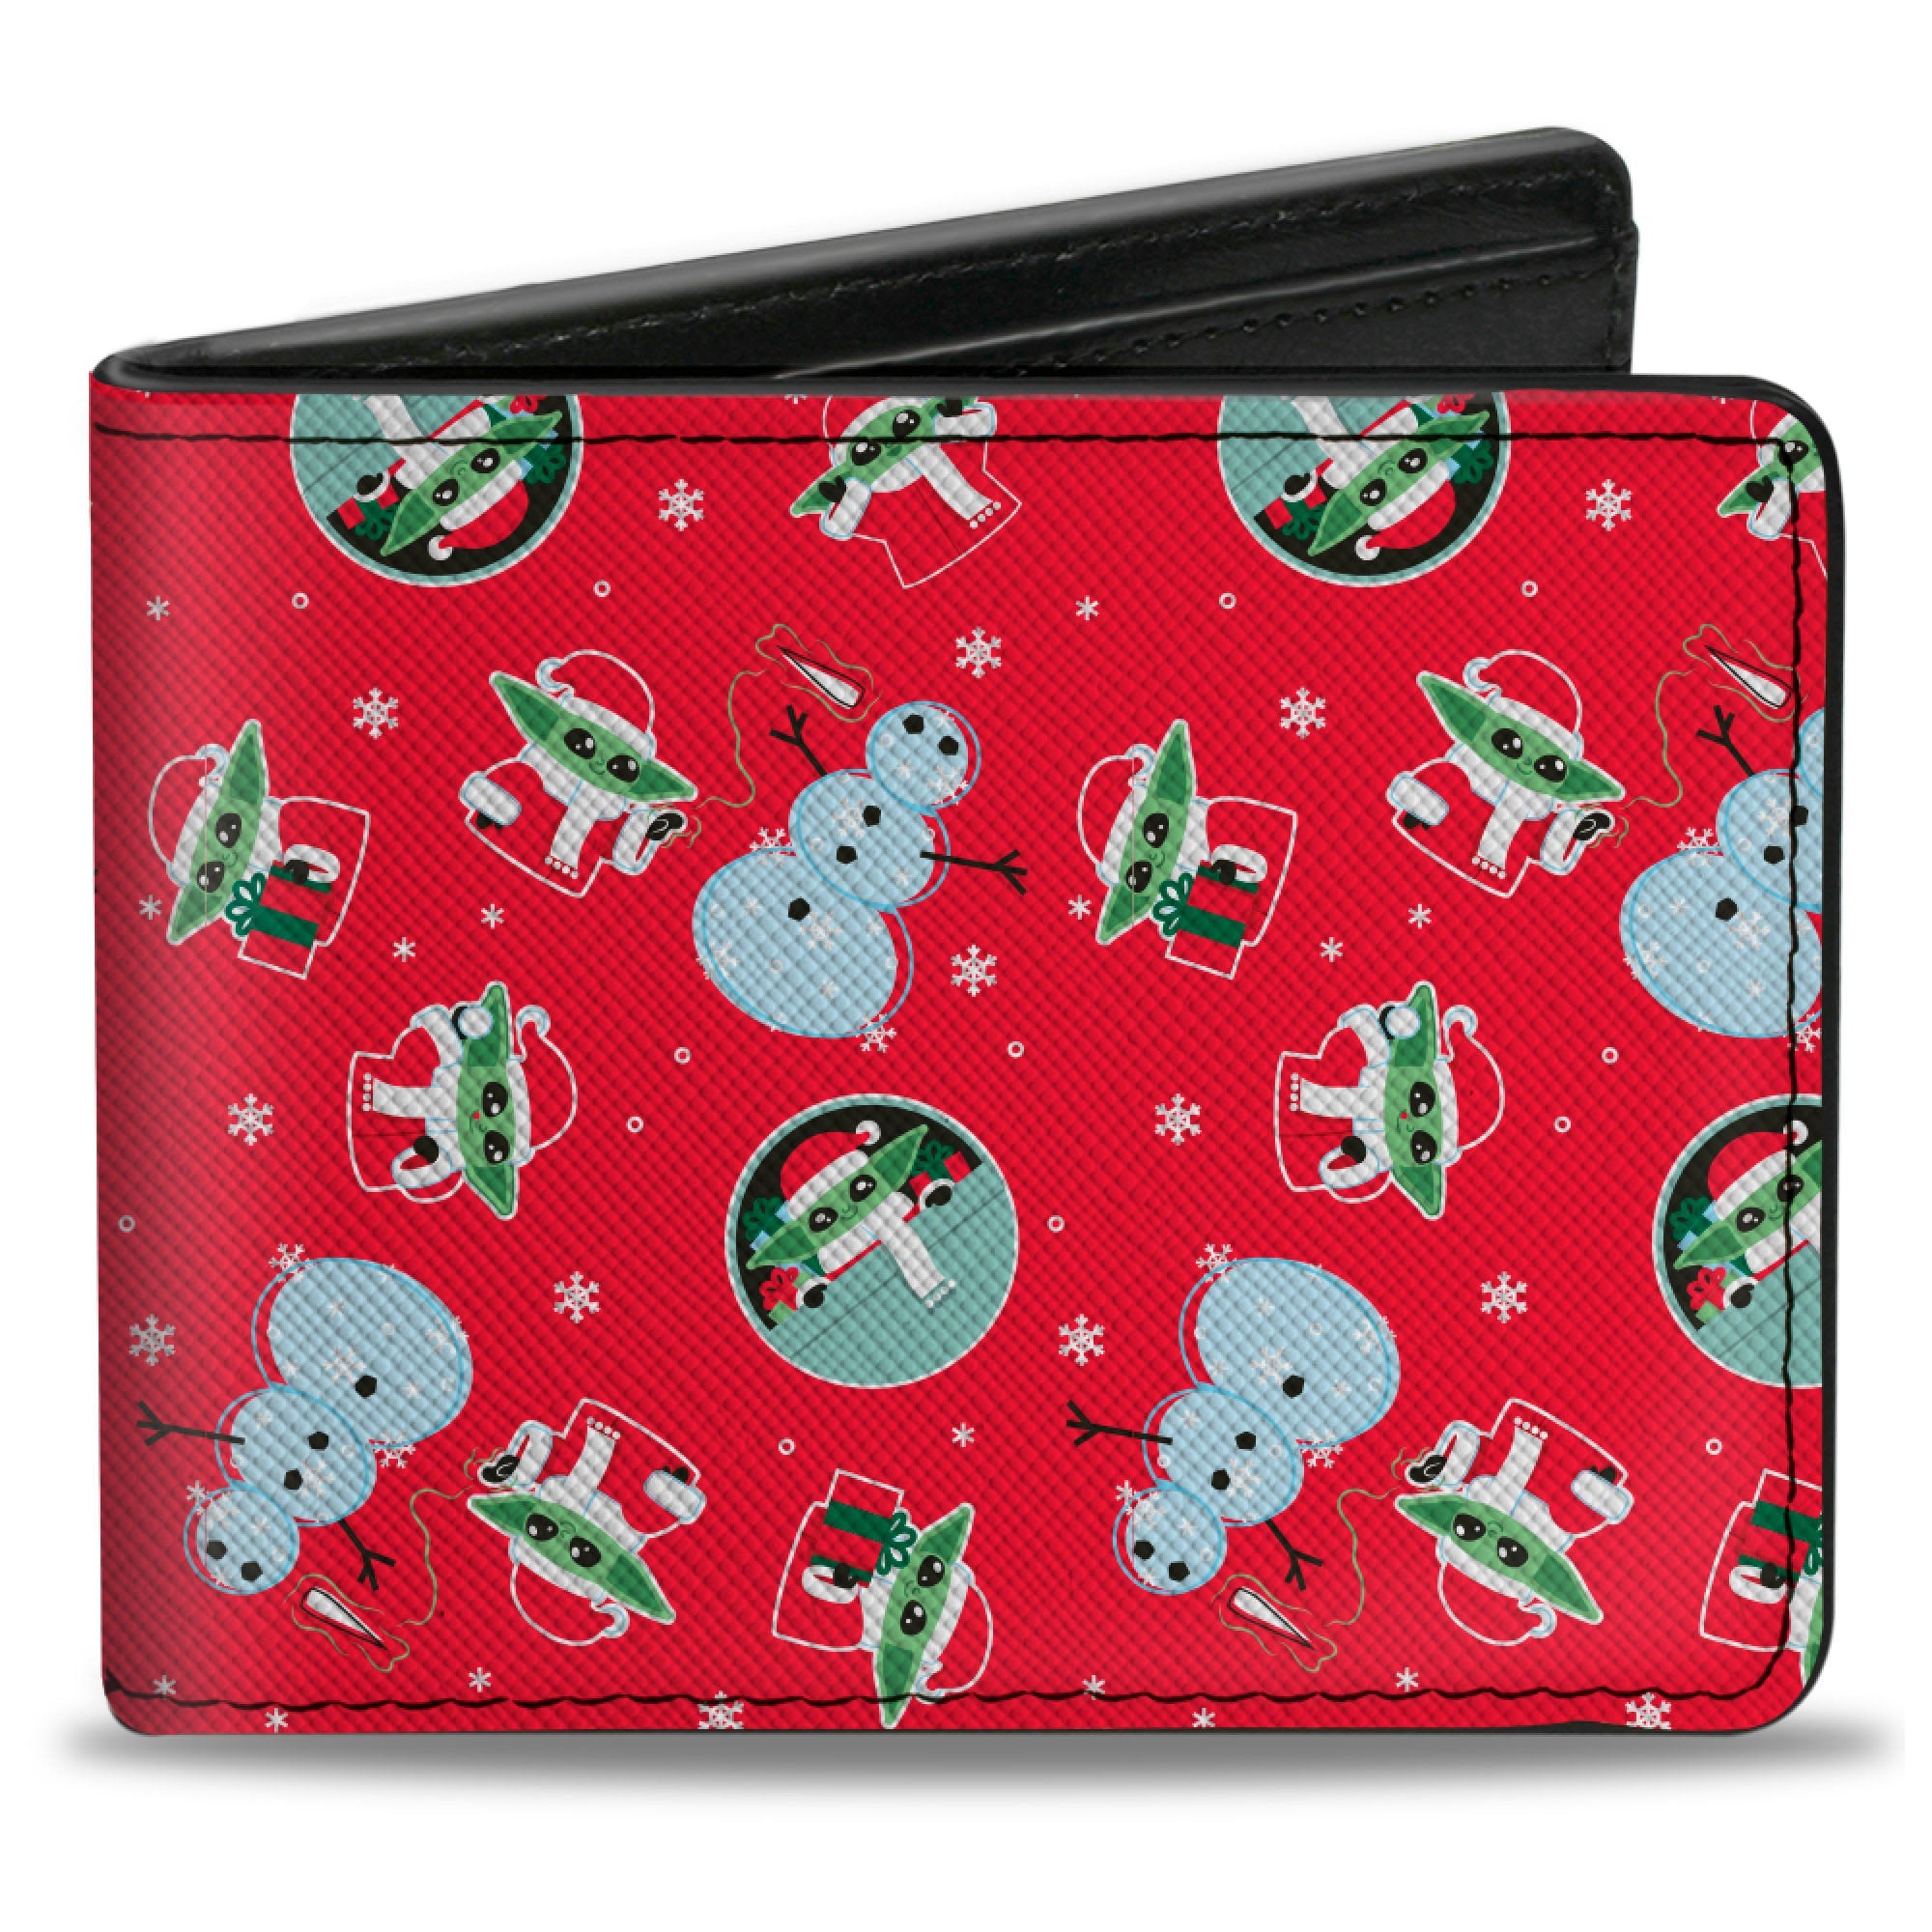 Bi-Fold Wallet - Star Wars Grogu The Child and Snowman Holiday Christmas Collage Red